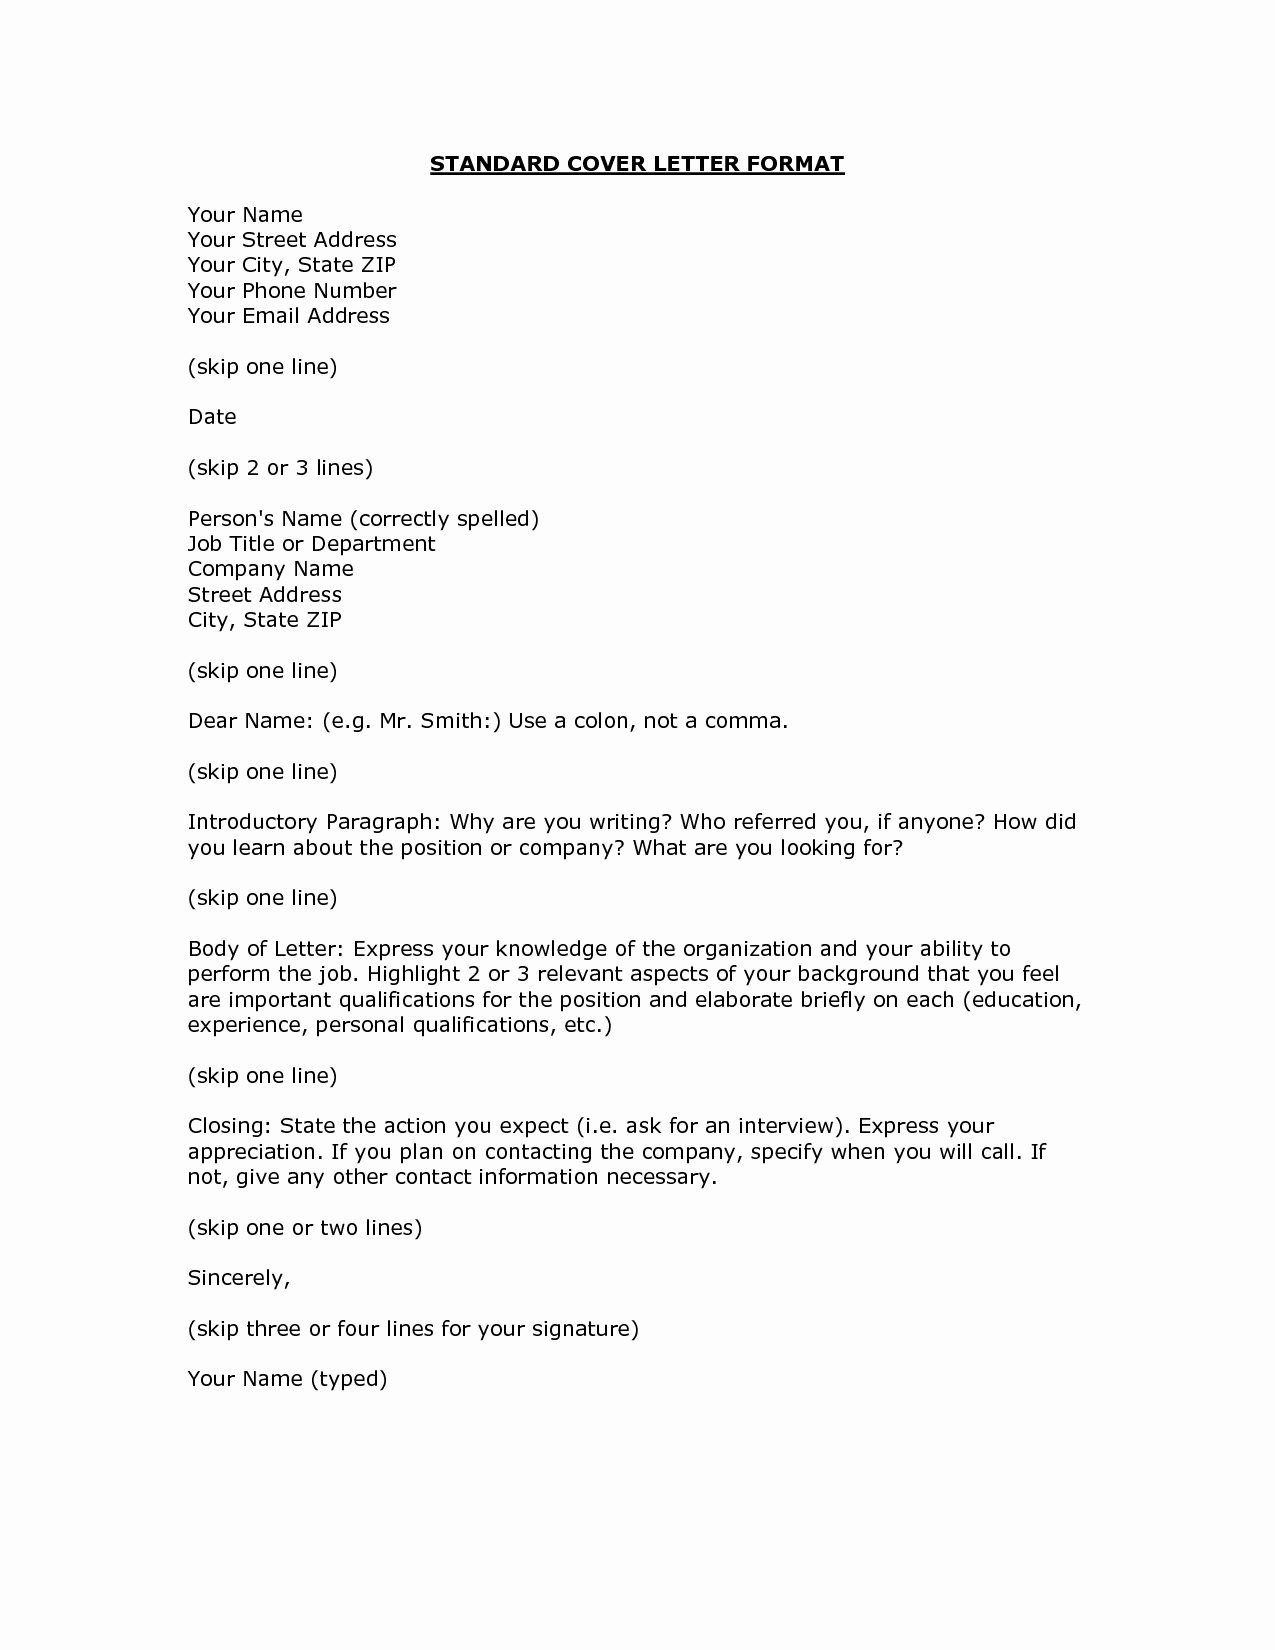 Business Cover Letter format Inspirational Proper format for A Cover Letter Google Search